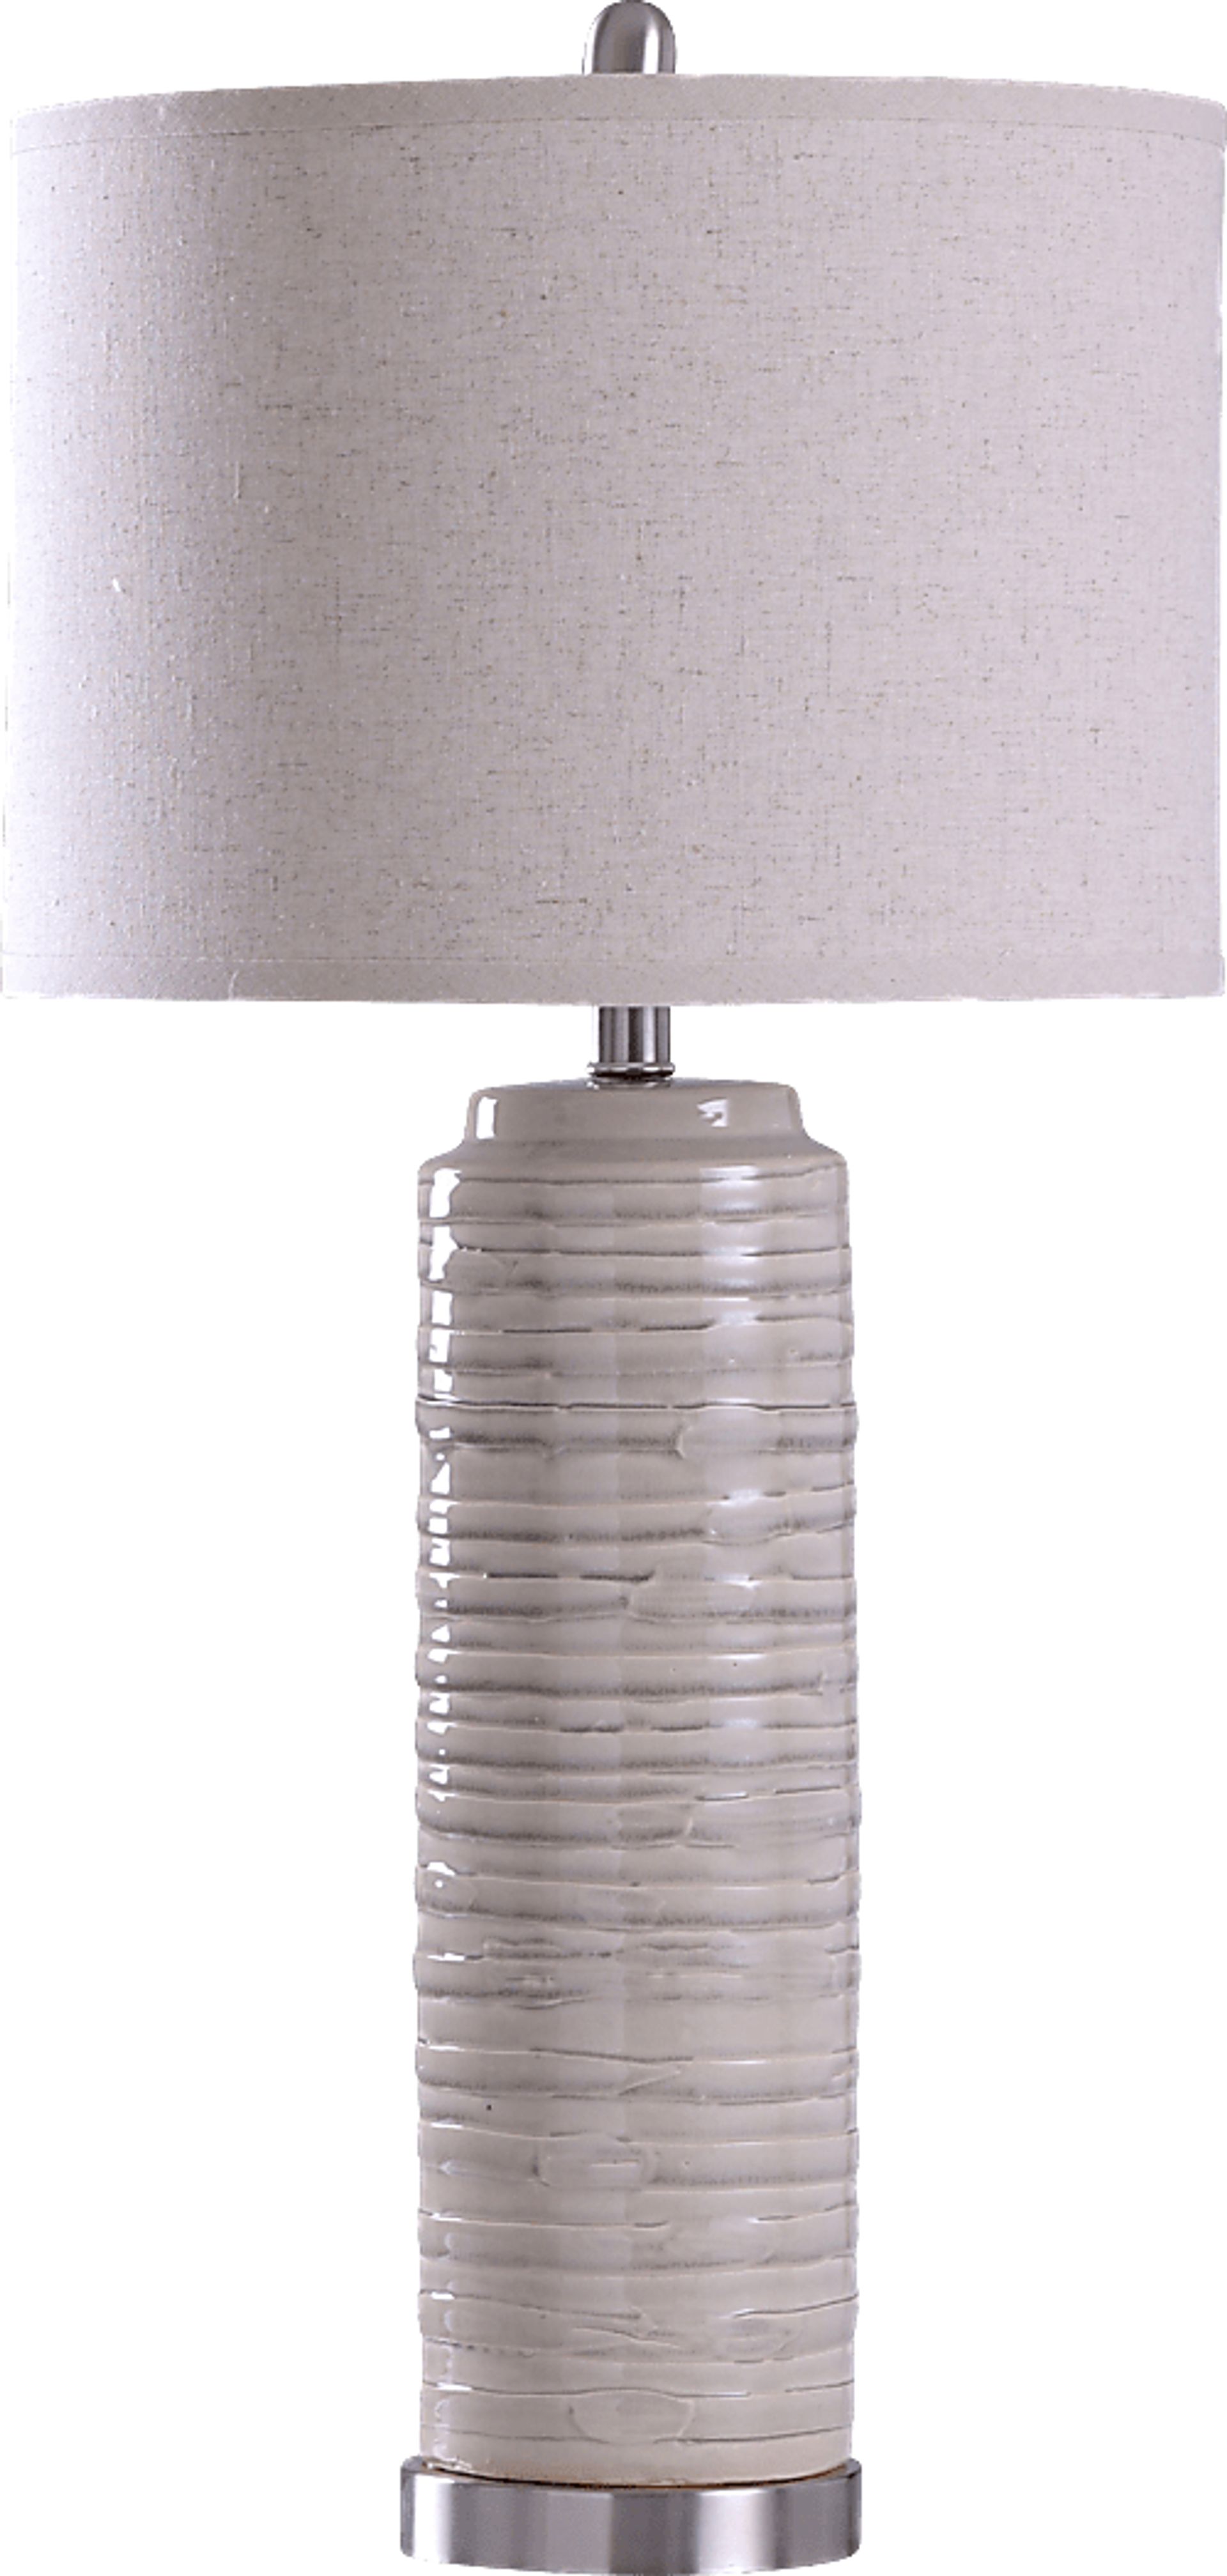 Knovill Beige Table Lamp | Rooms to Go